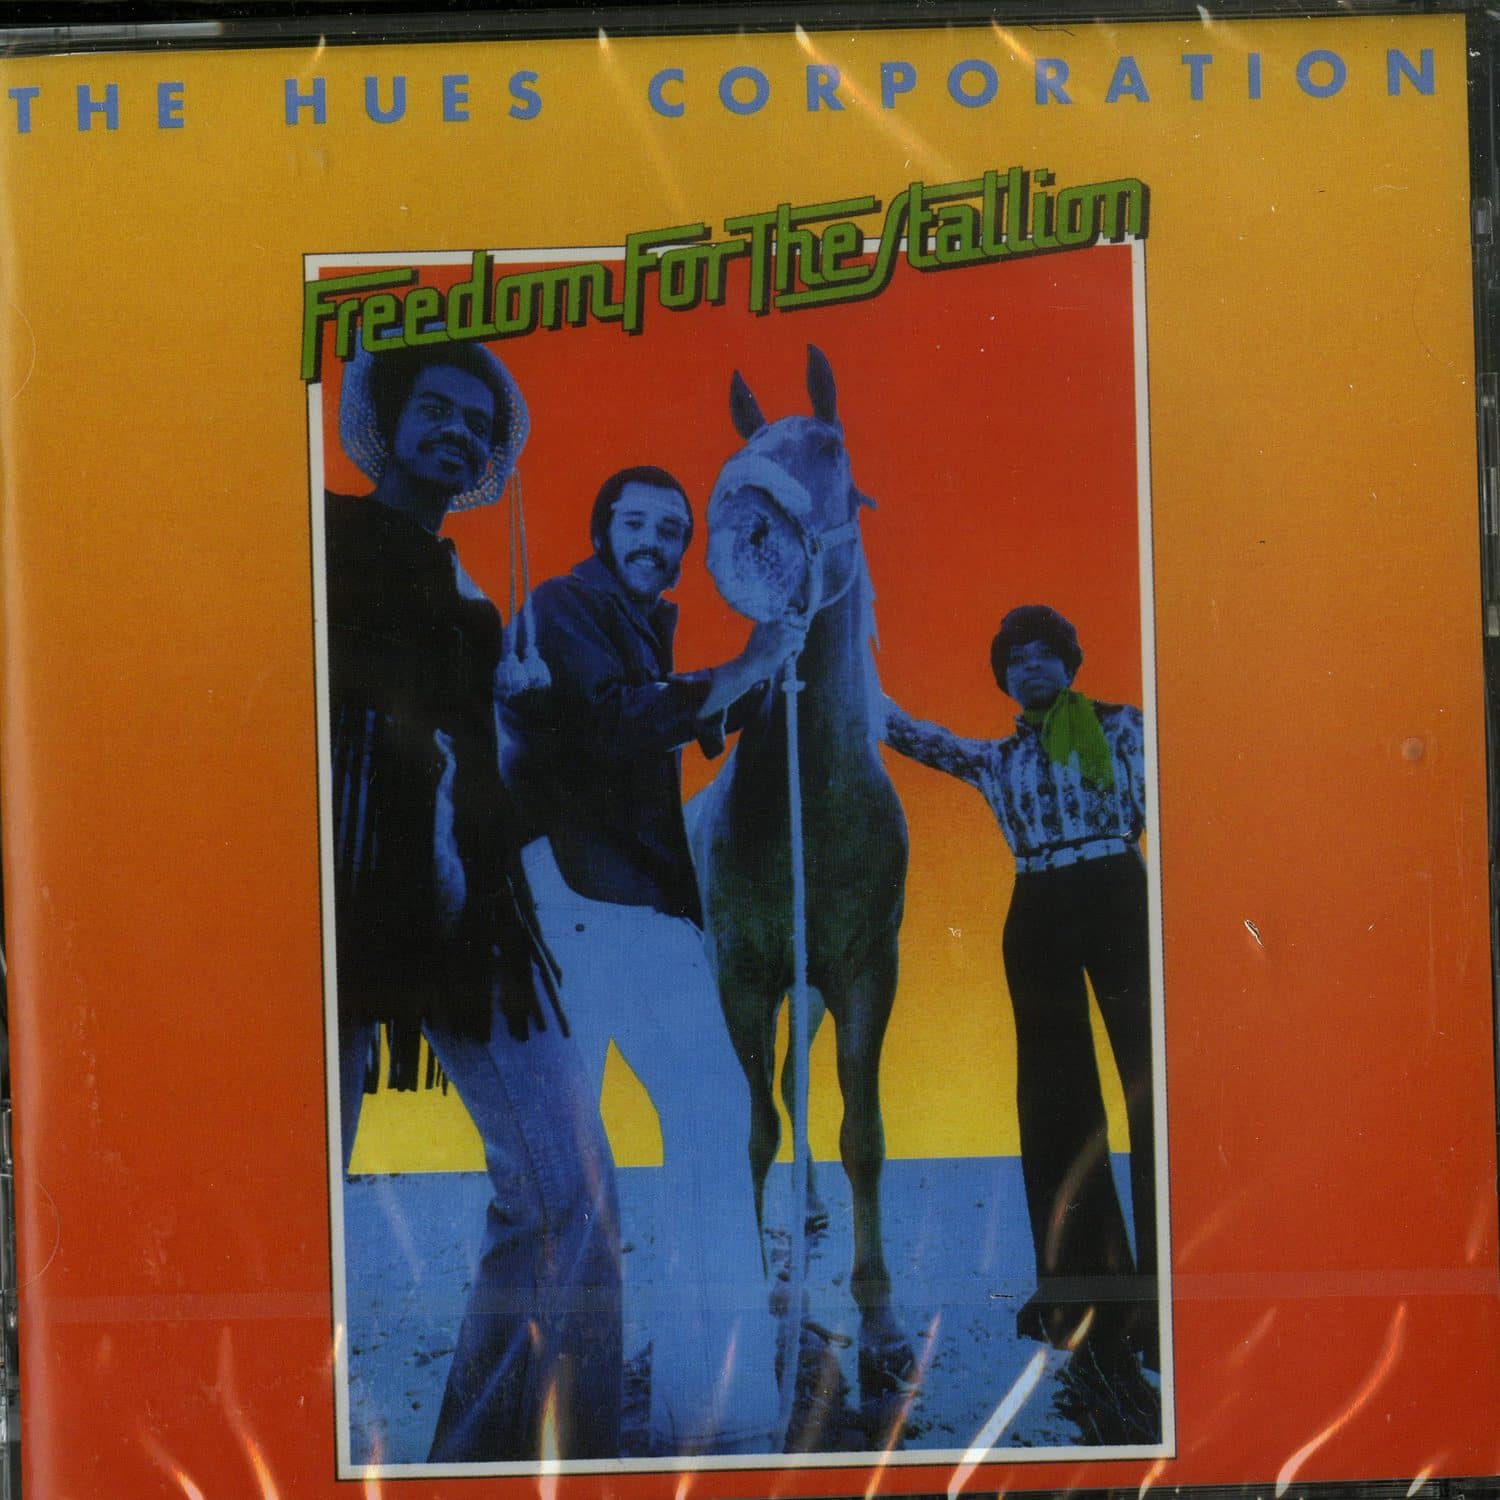 The Hues Corporation - FREEDOM FOR THE STALLION 